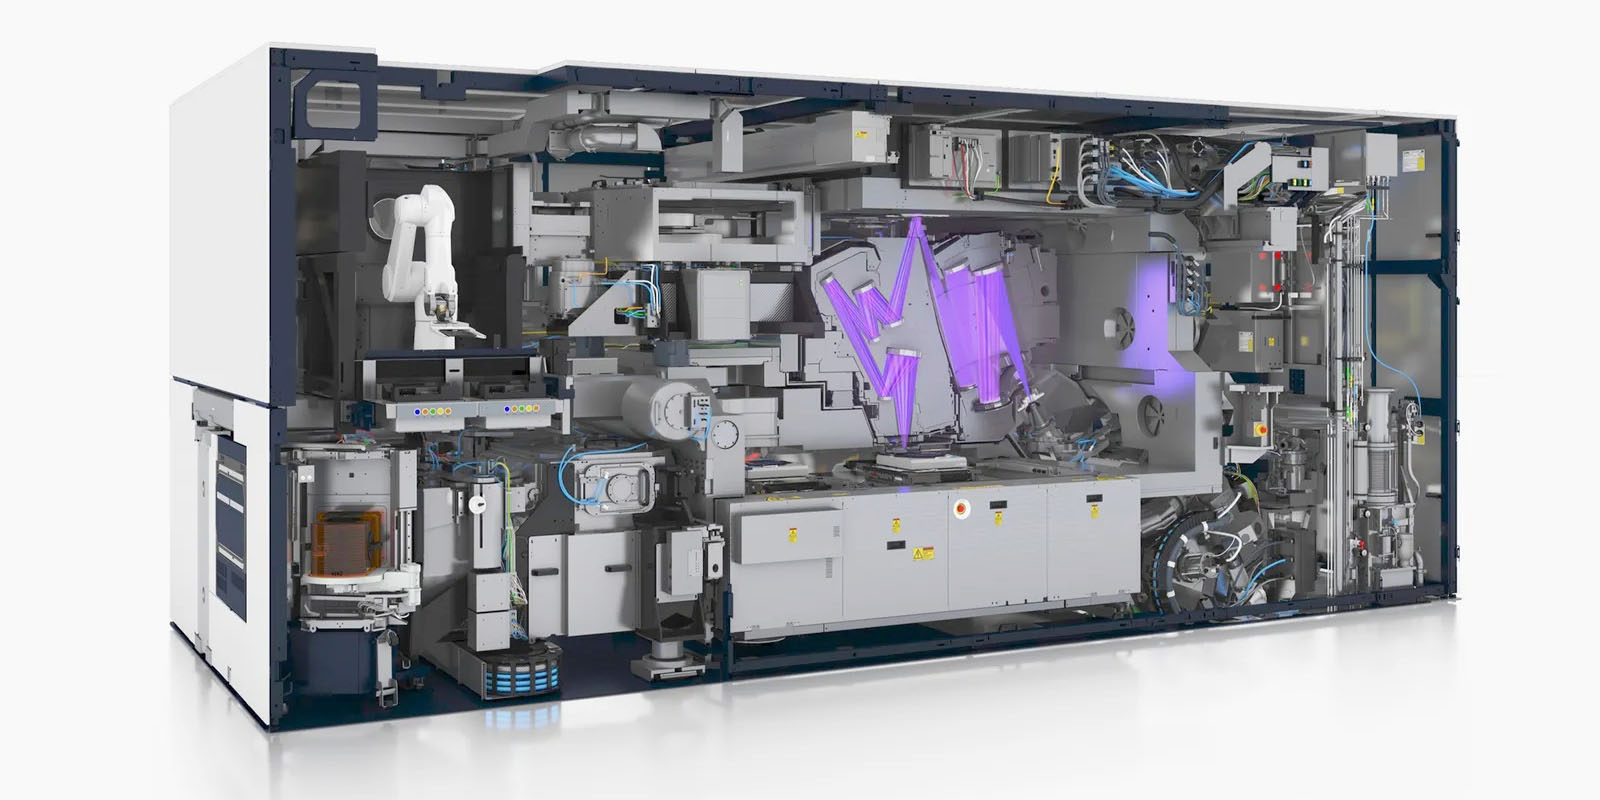 AMSL extreme ultraviolet lithography machine with case open | Chips for chipmaking machines are affected by chip shortage